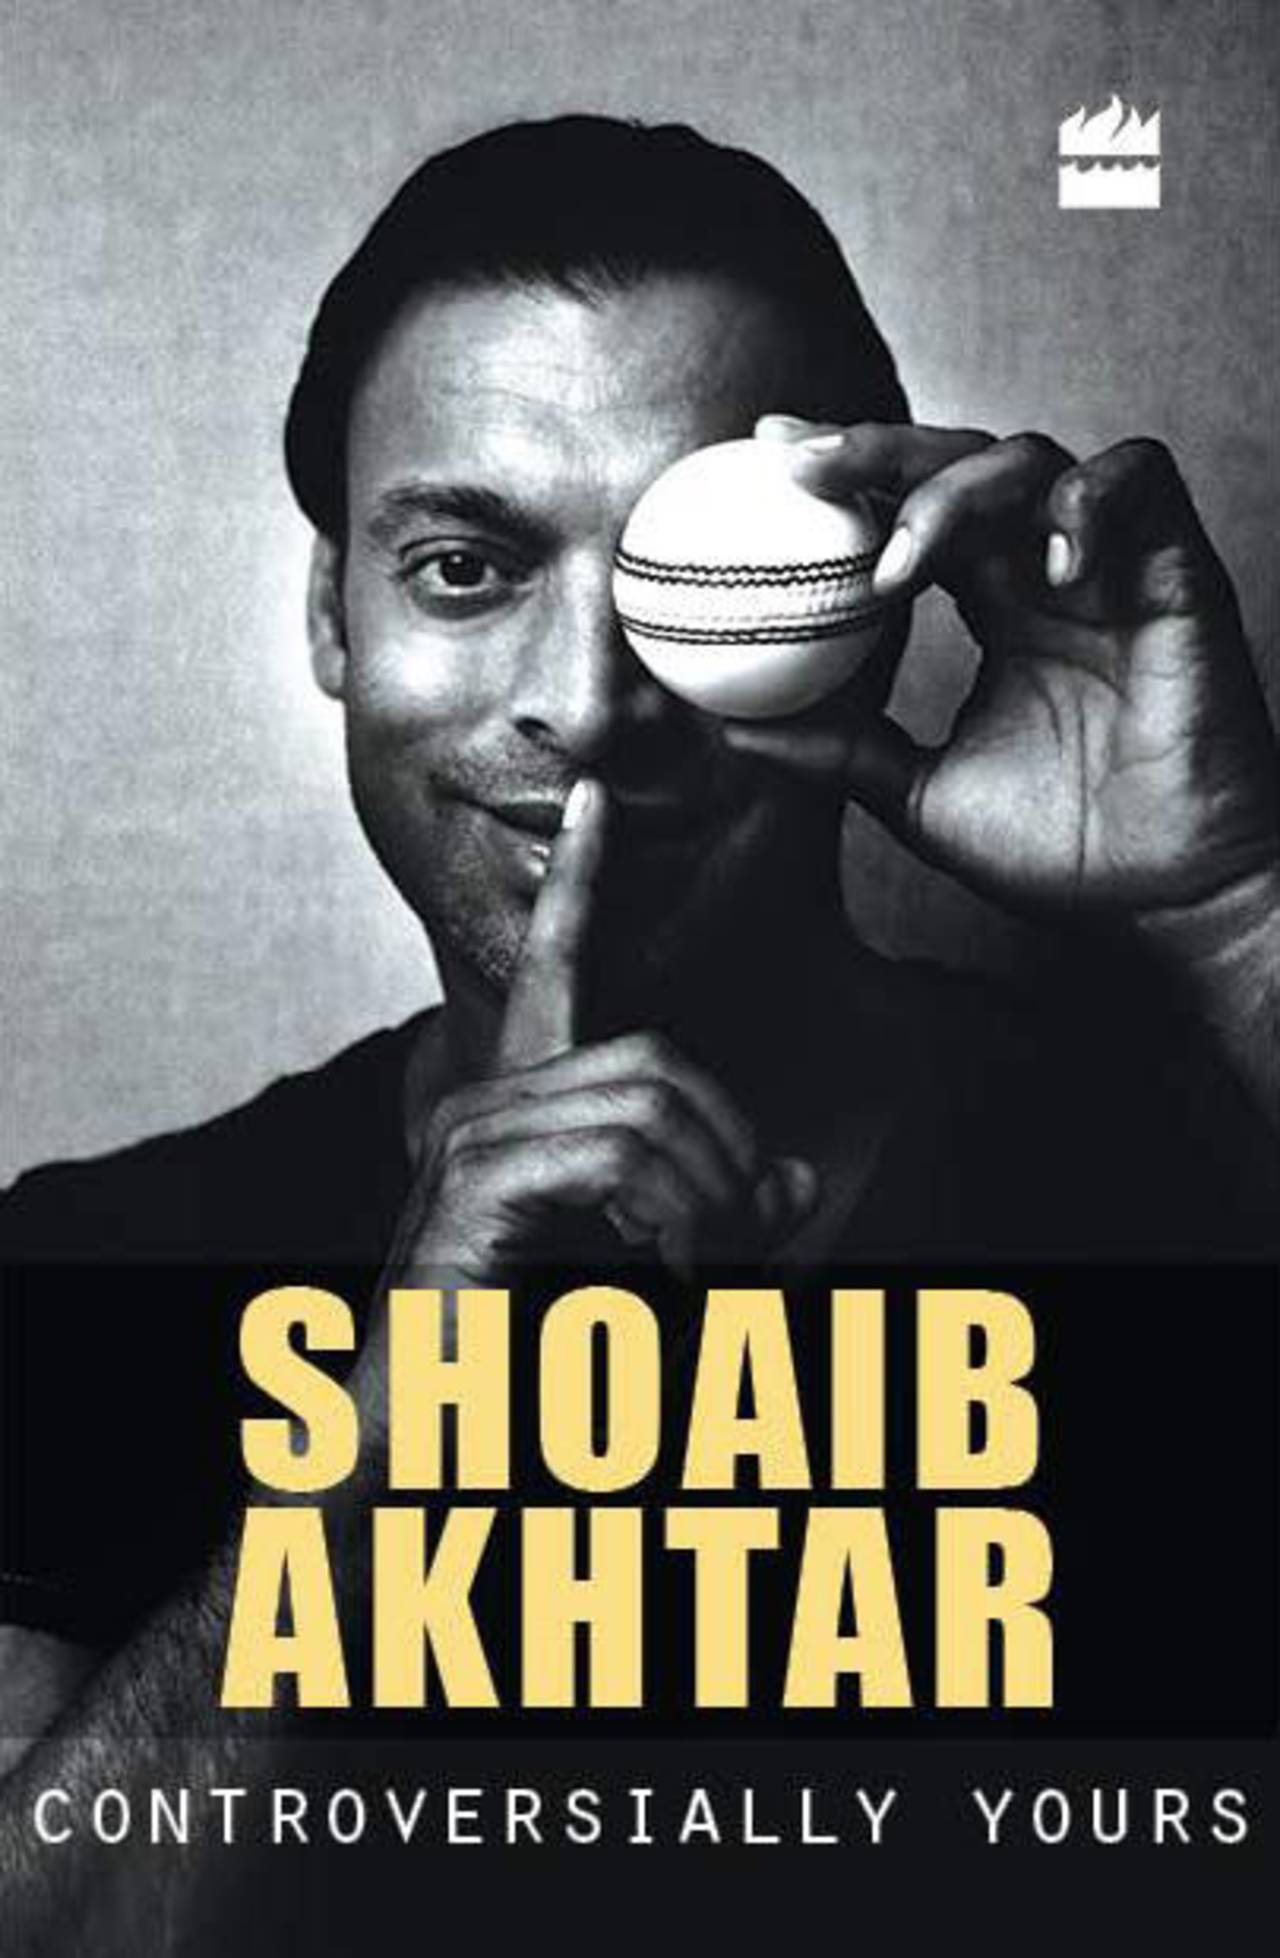 Cover image of <i>Controversially Yours</i> by Shoaib Akhtar